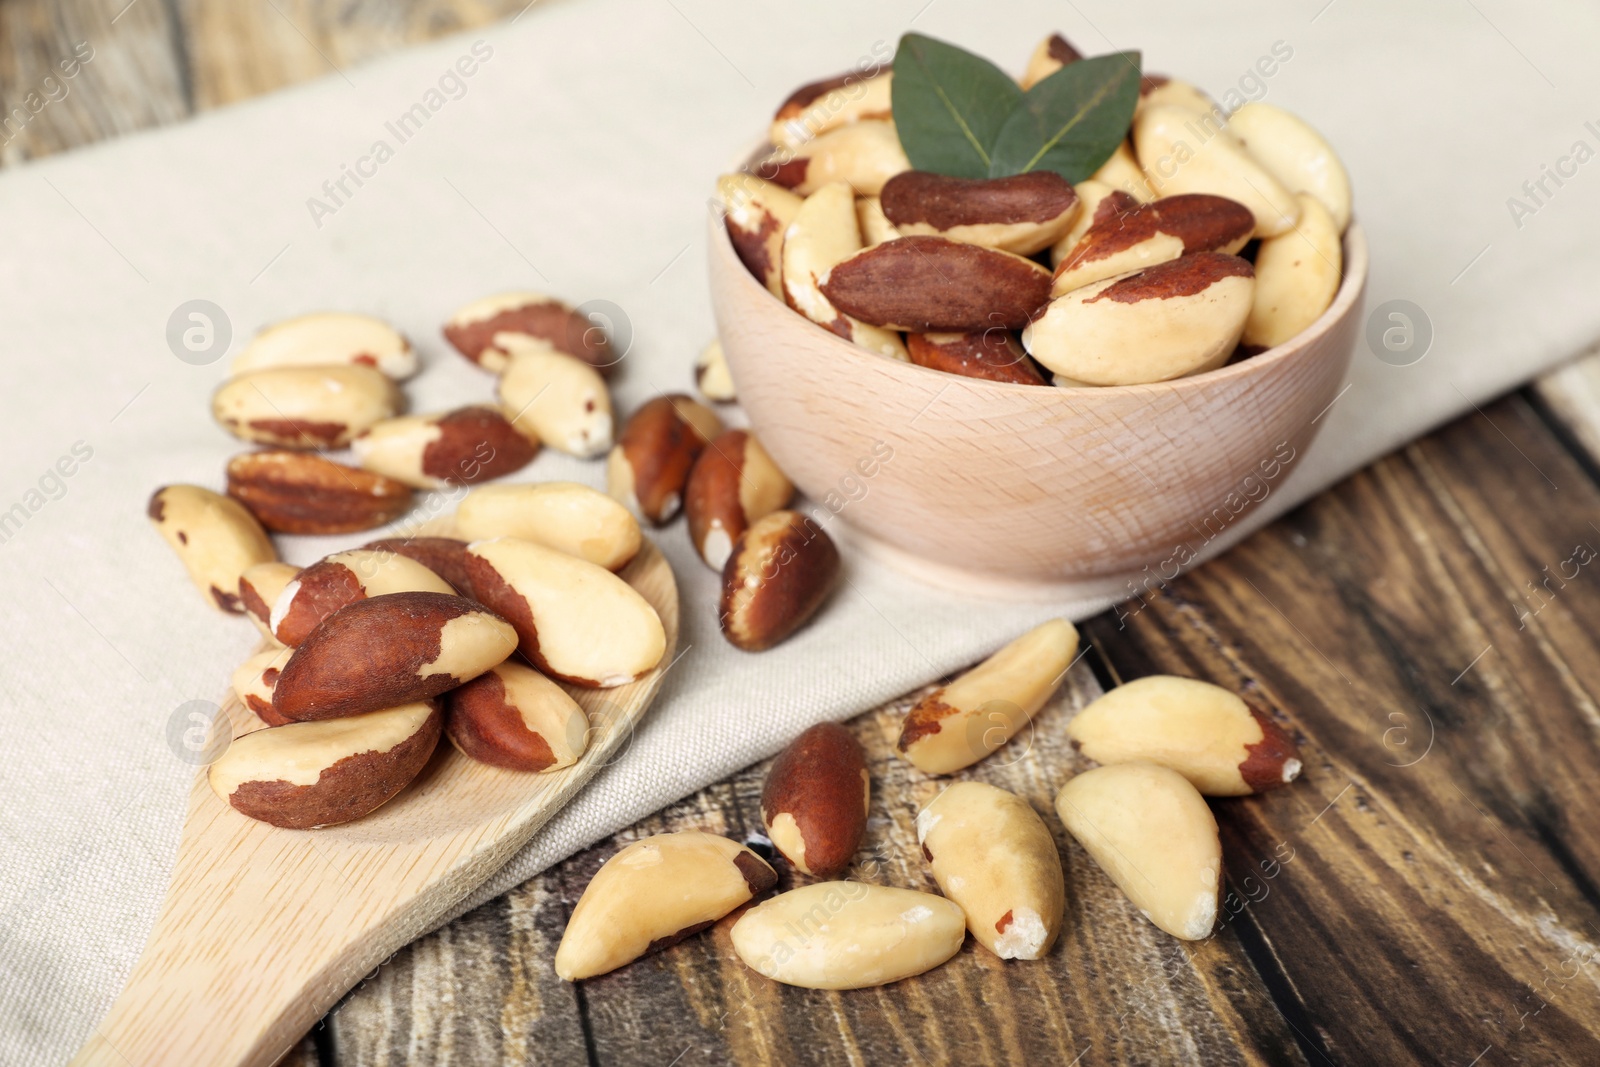 Photo of Many delicious Brazil nuts on wooden table